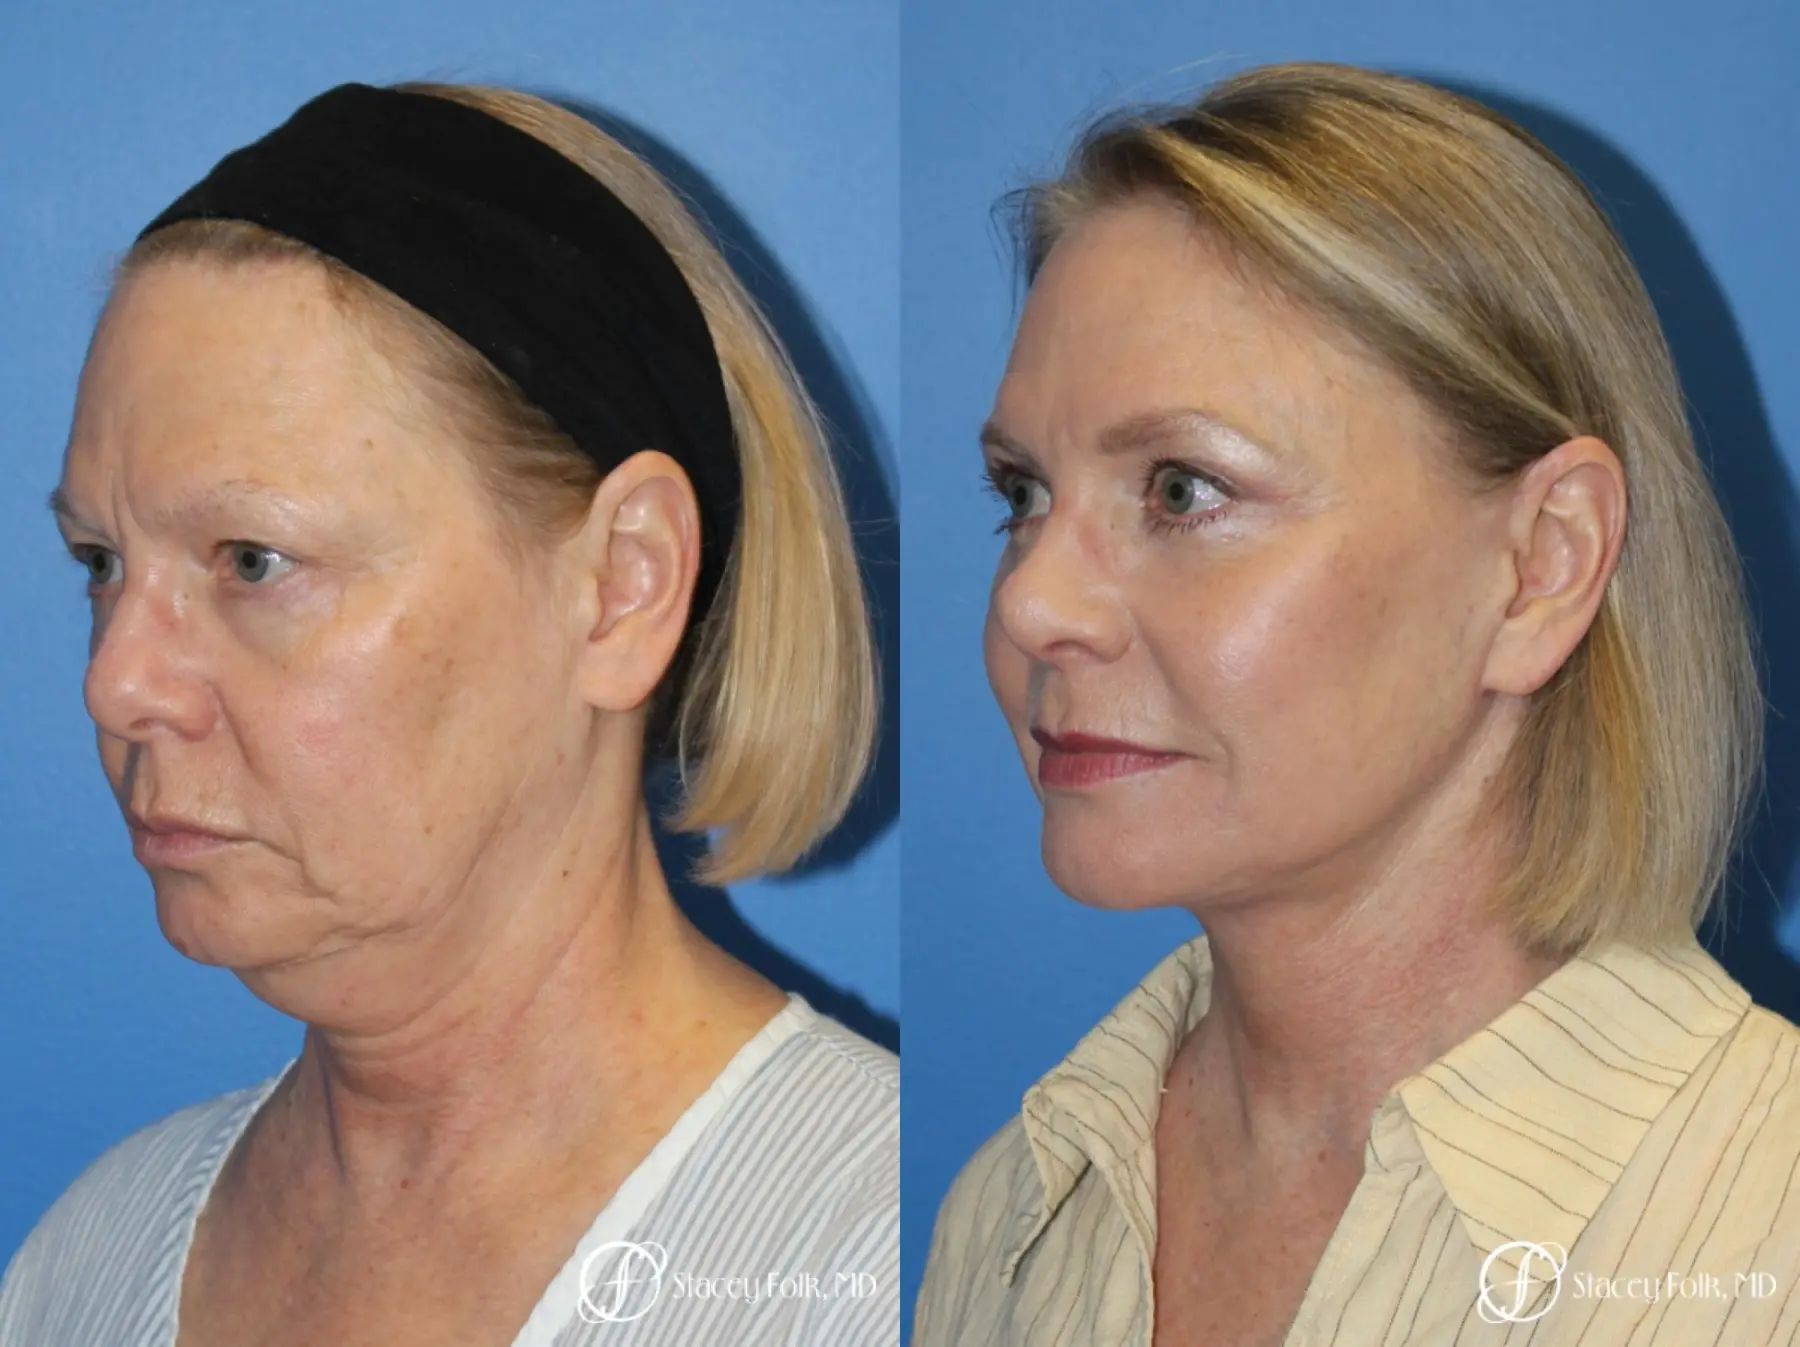 Facial Rejuvenation: Patient 1 - Before and After 2